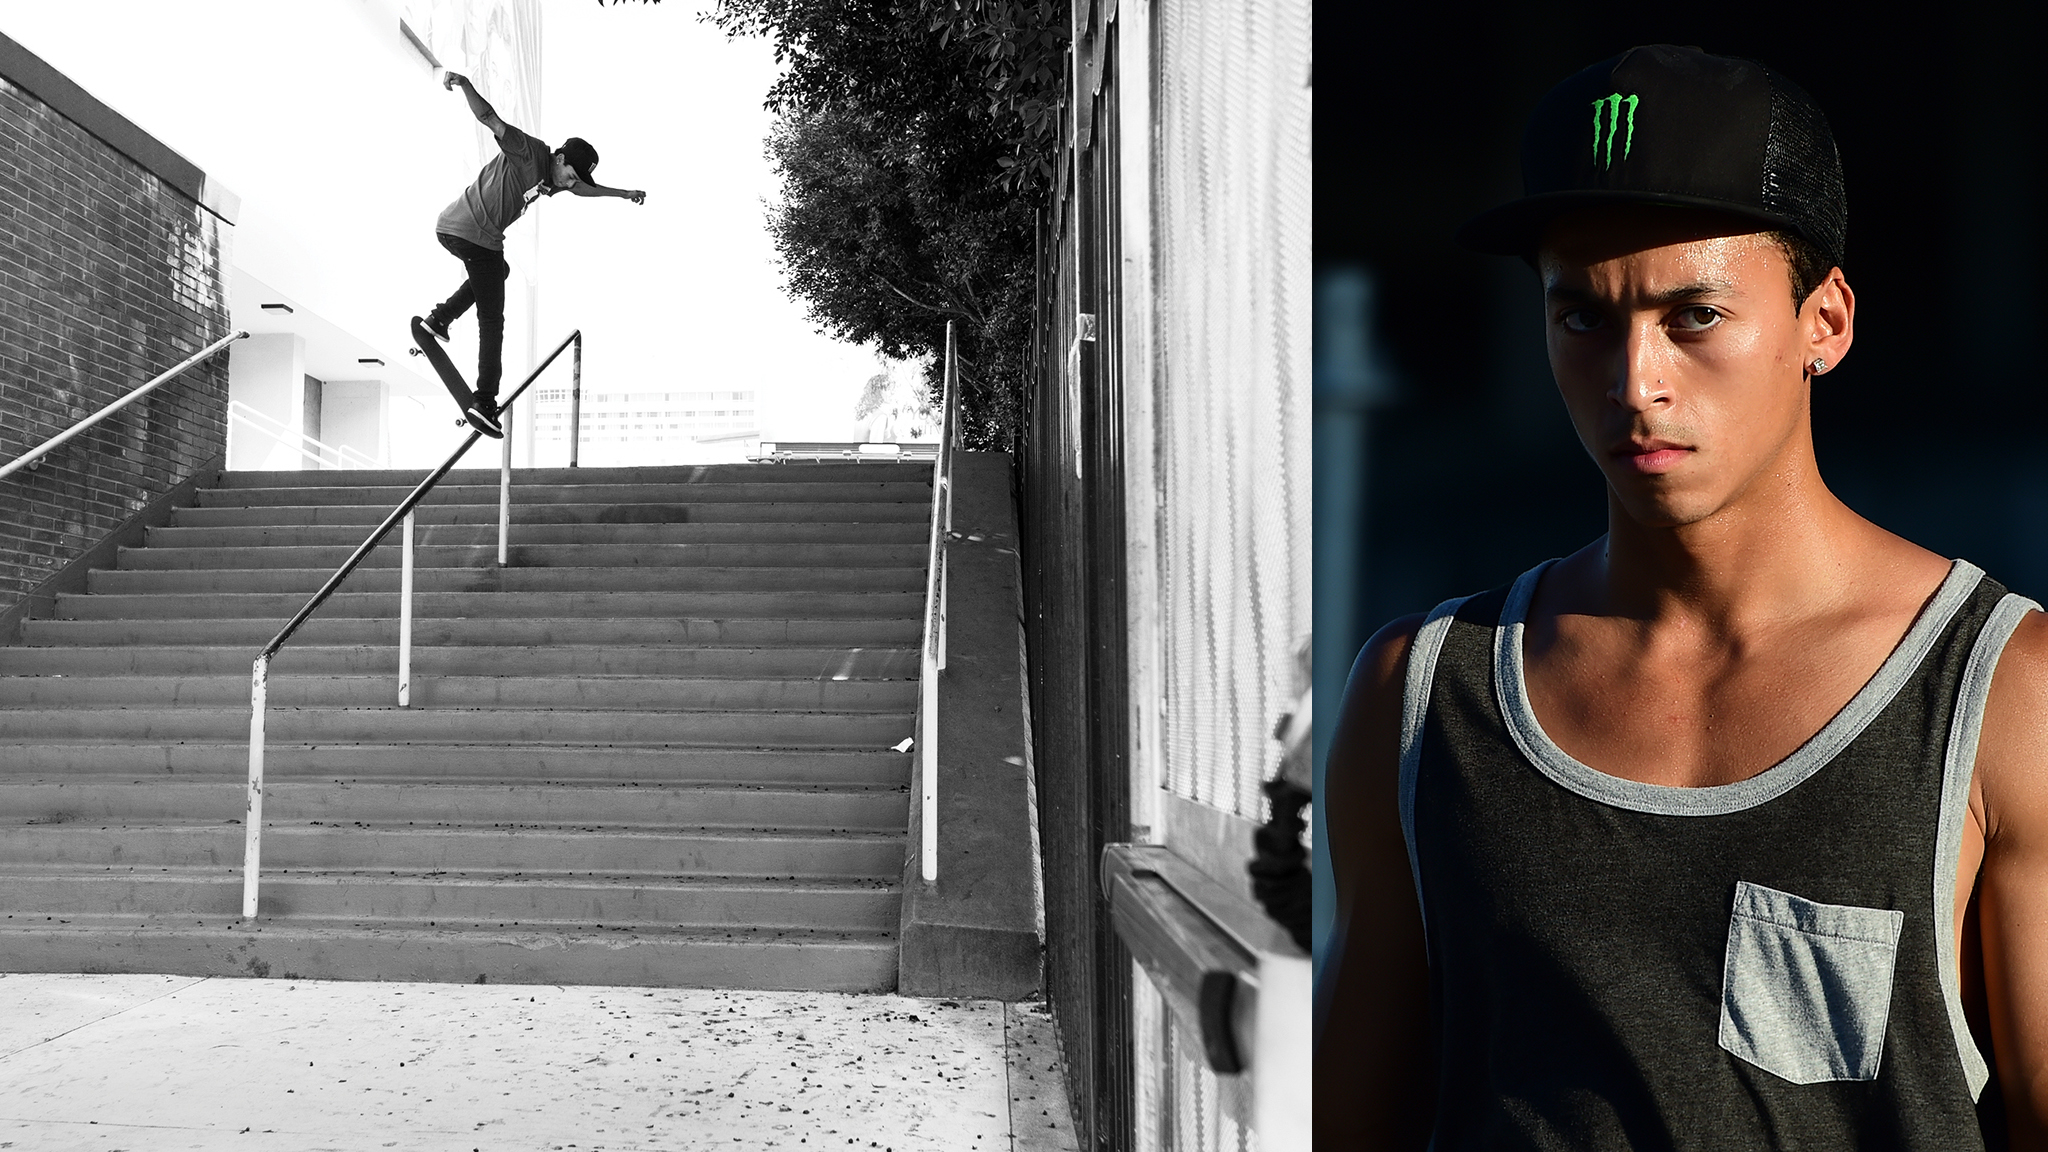 Skateboarder Nyjah Huston is up for a nomination in the best male action sp...